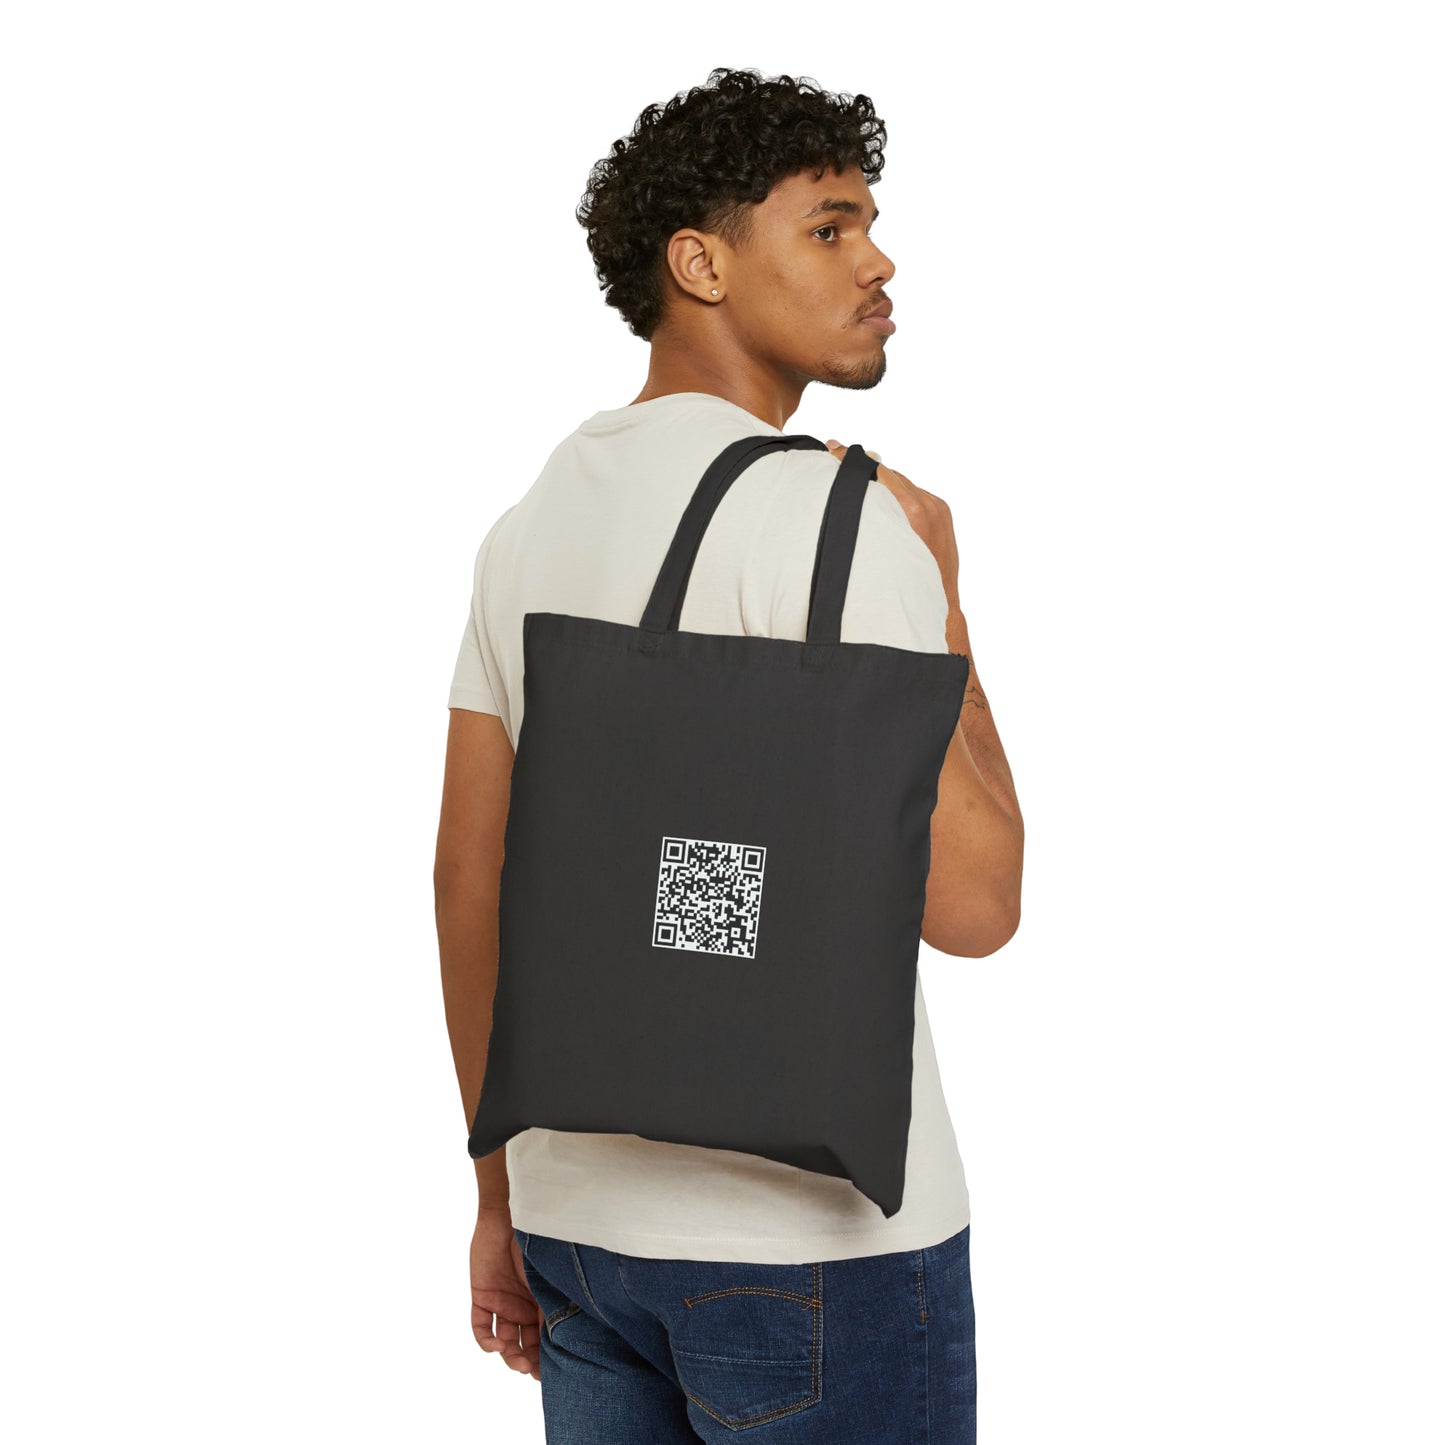 The Stones of Fire and Water - Cotton Canvas Tote Bag